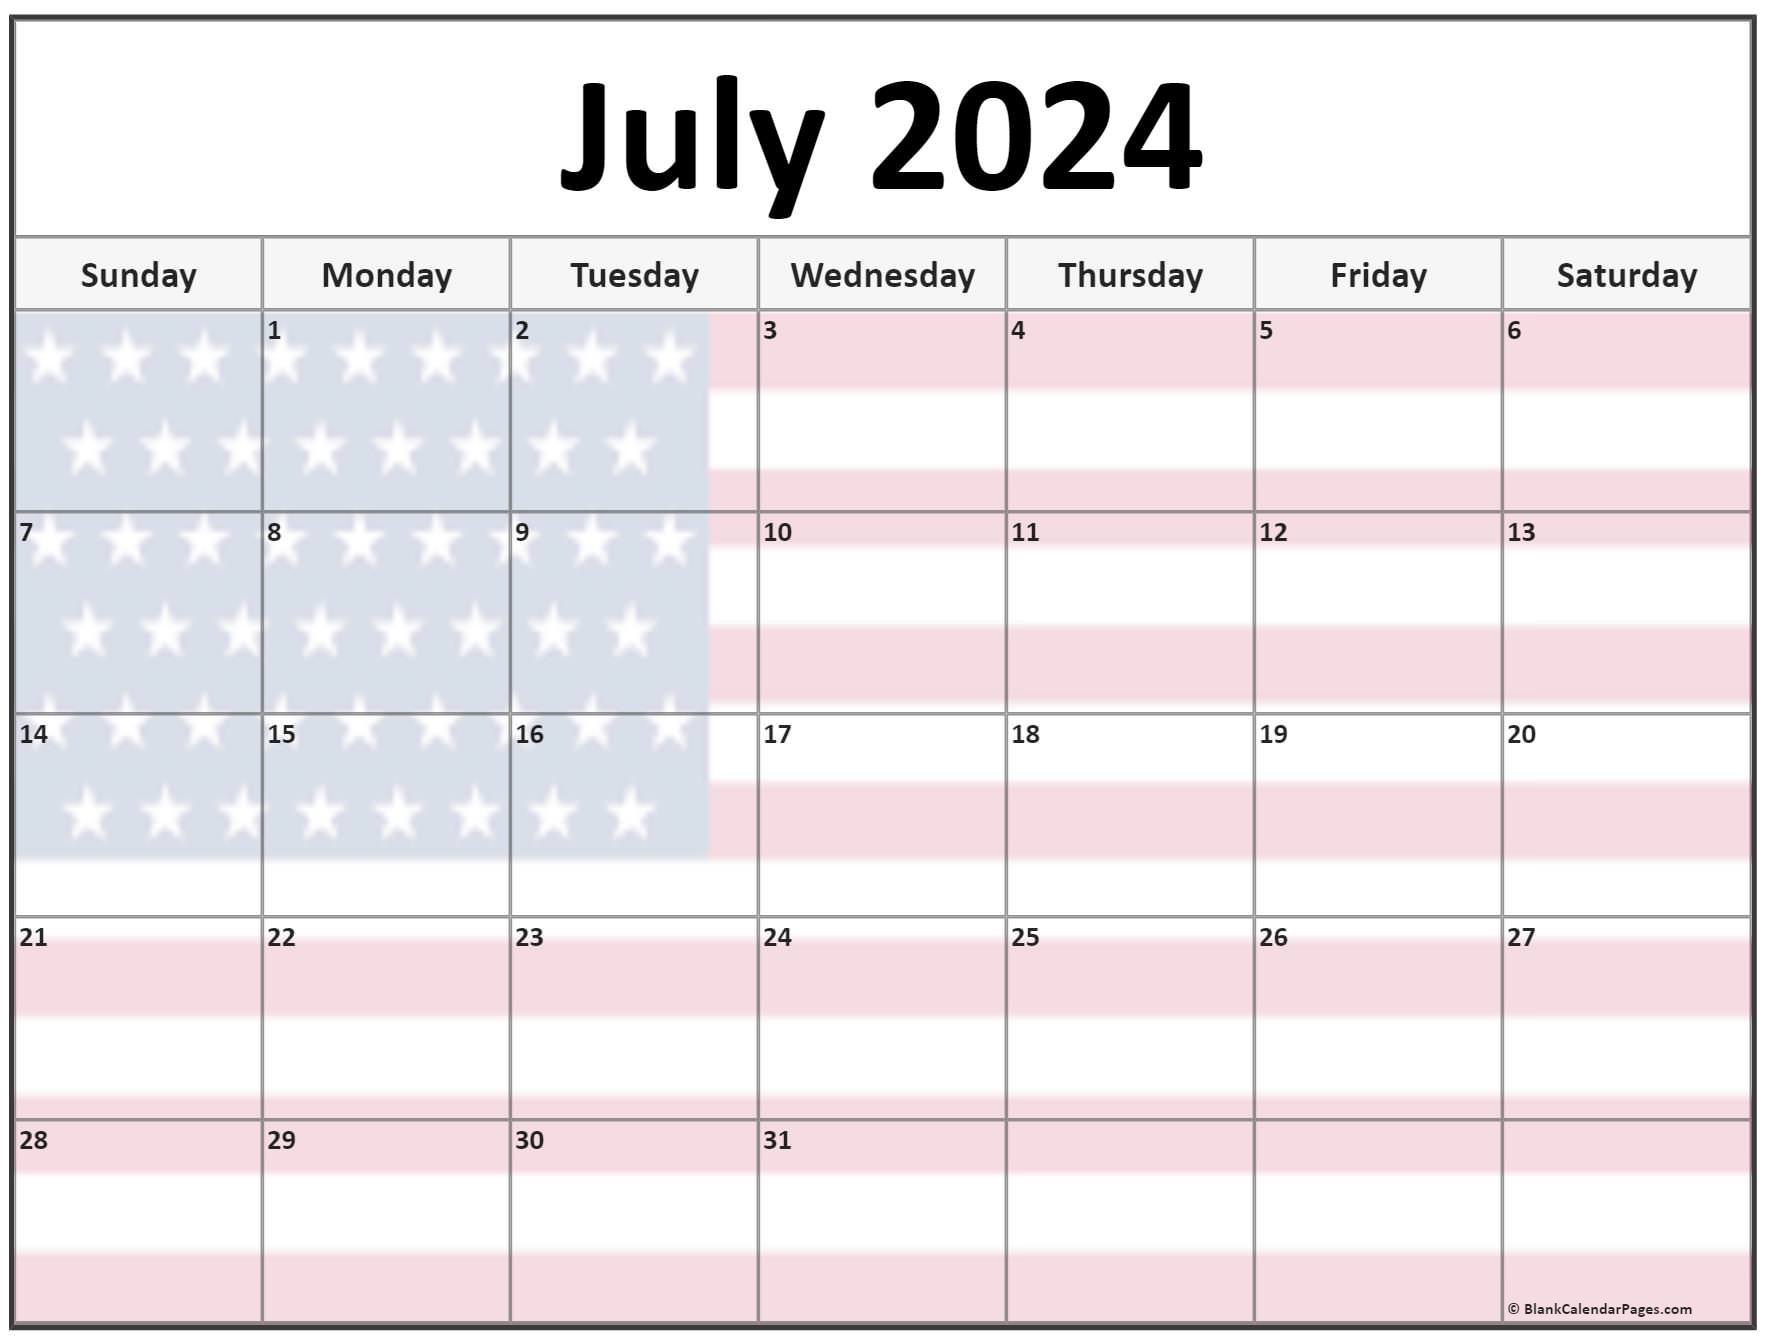 Vallejo 4th Of July 2024 Calendar Corly Gwenore